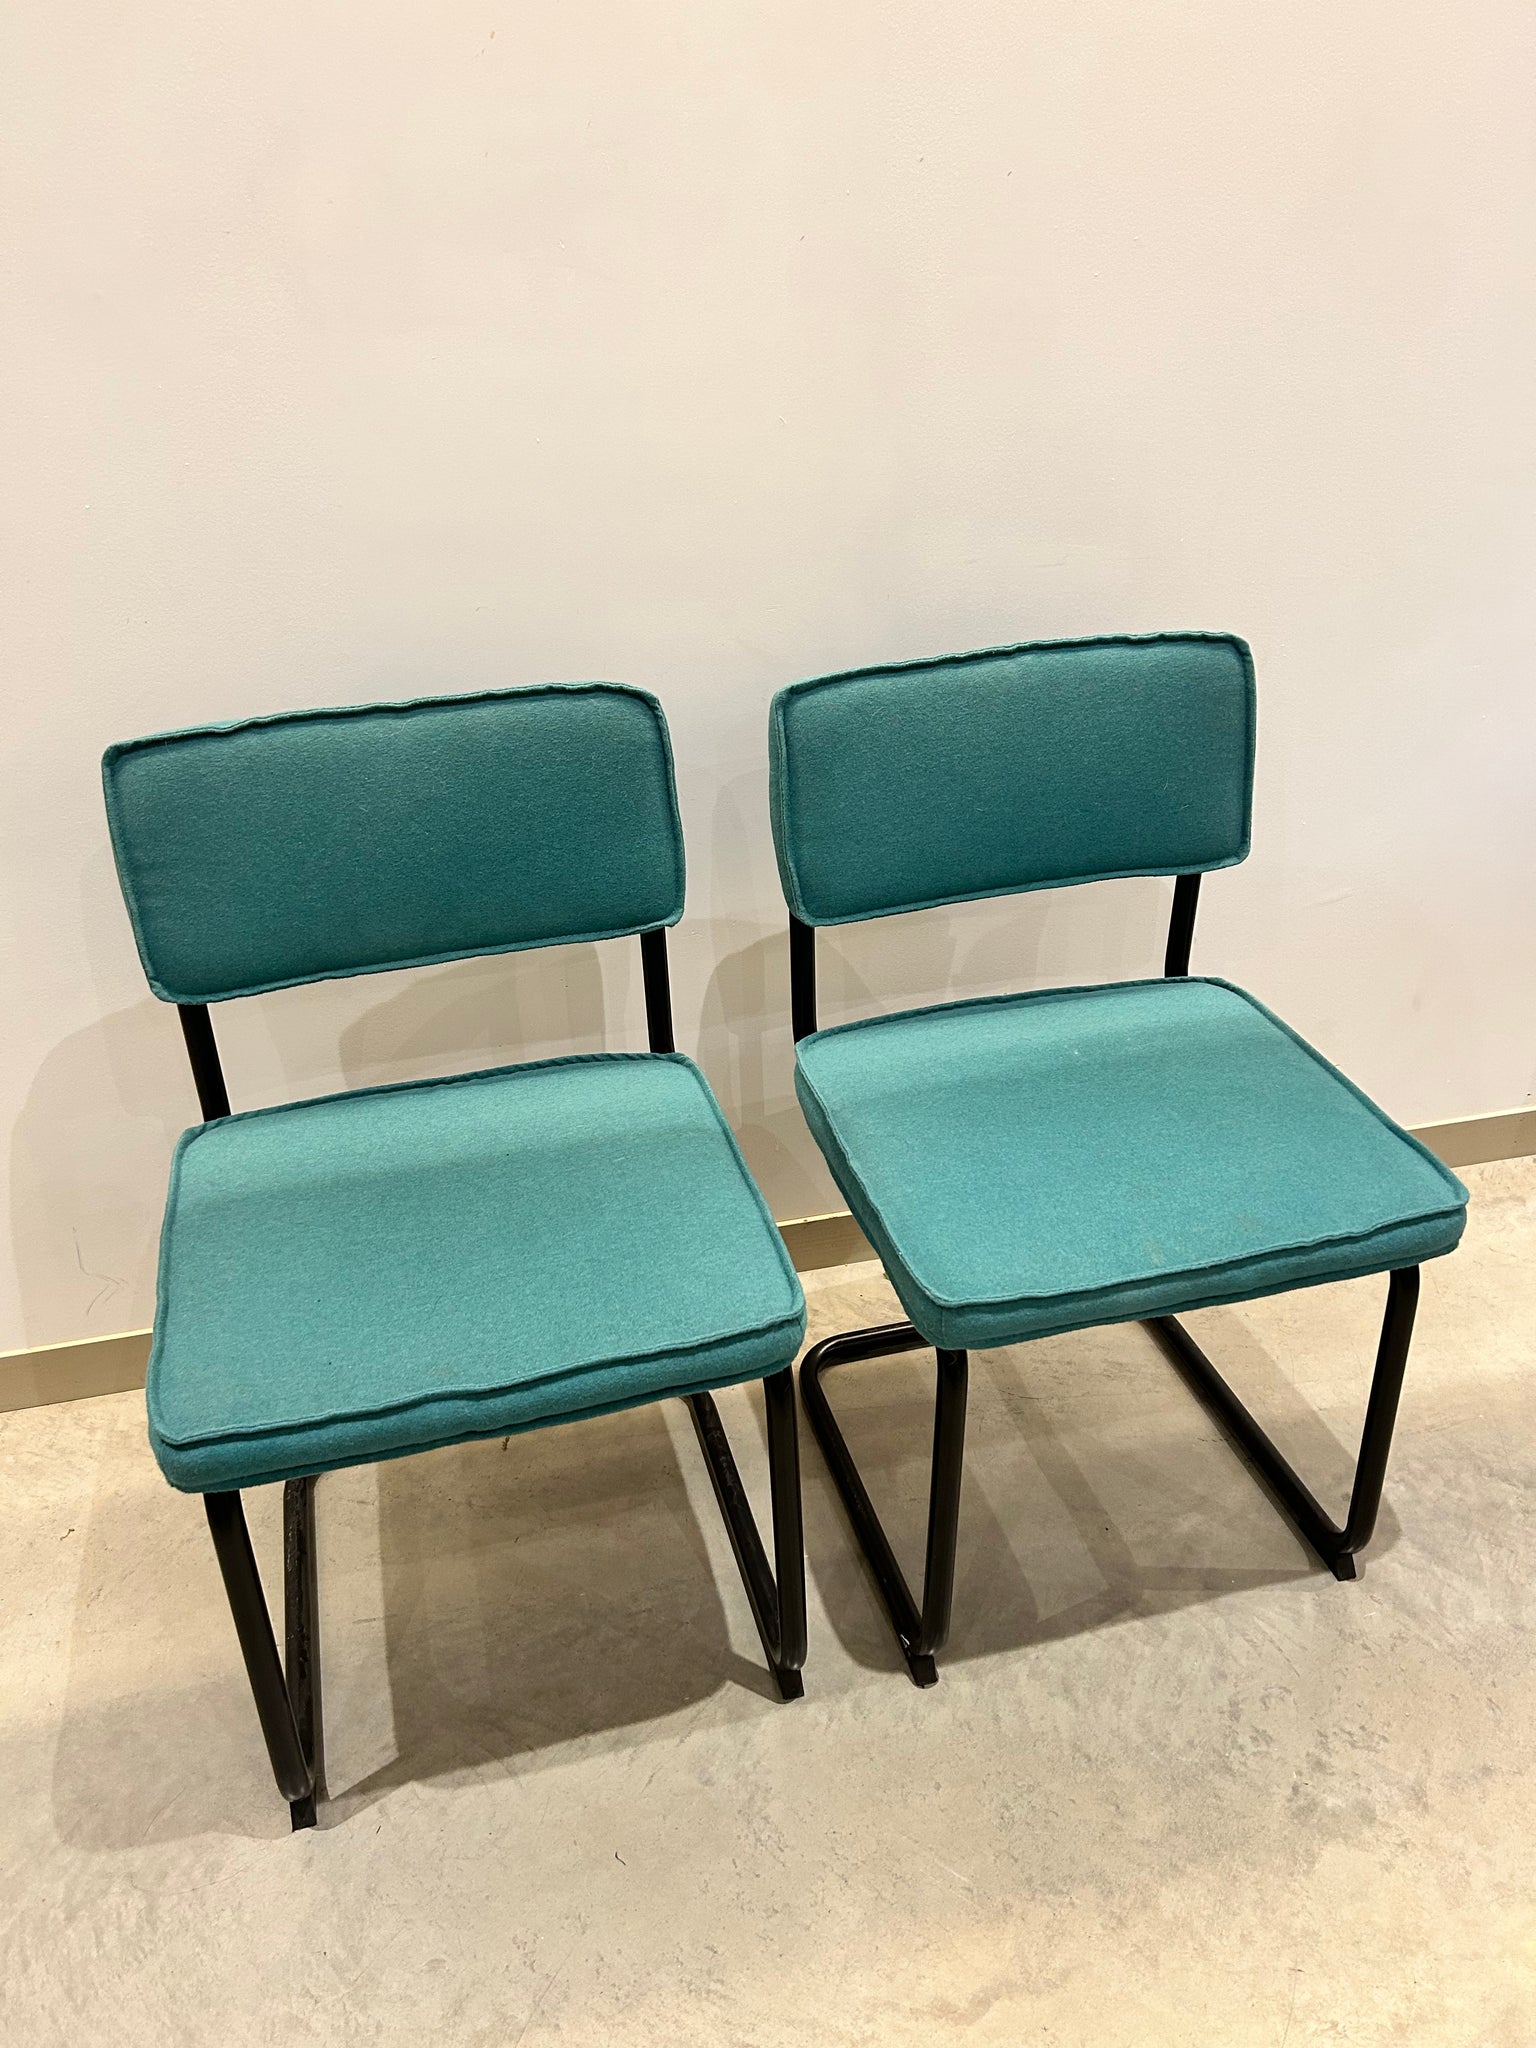 Teal felt & black metal cantilever chairs